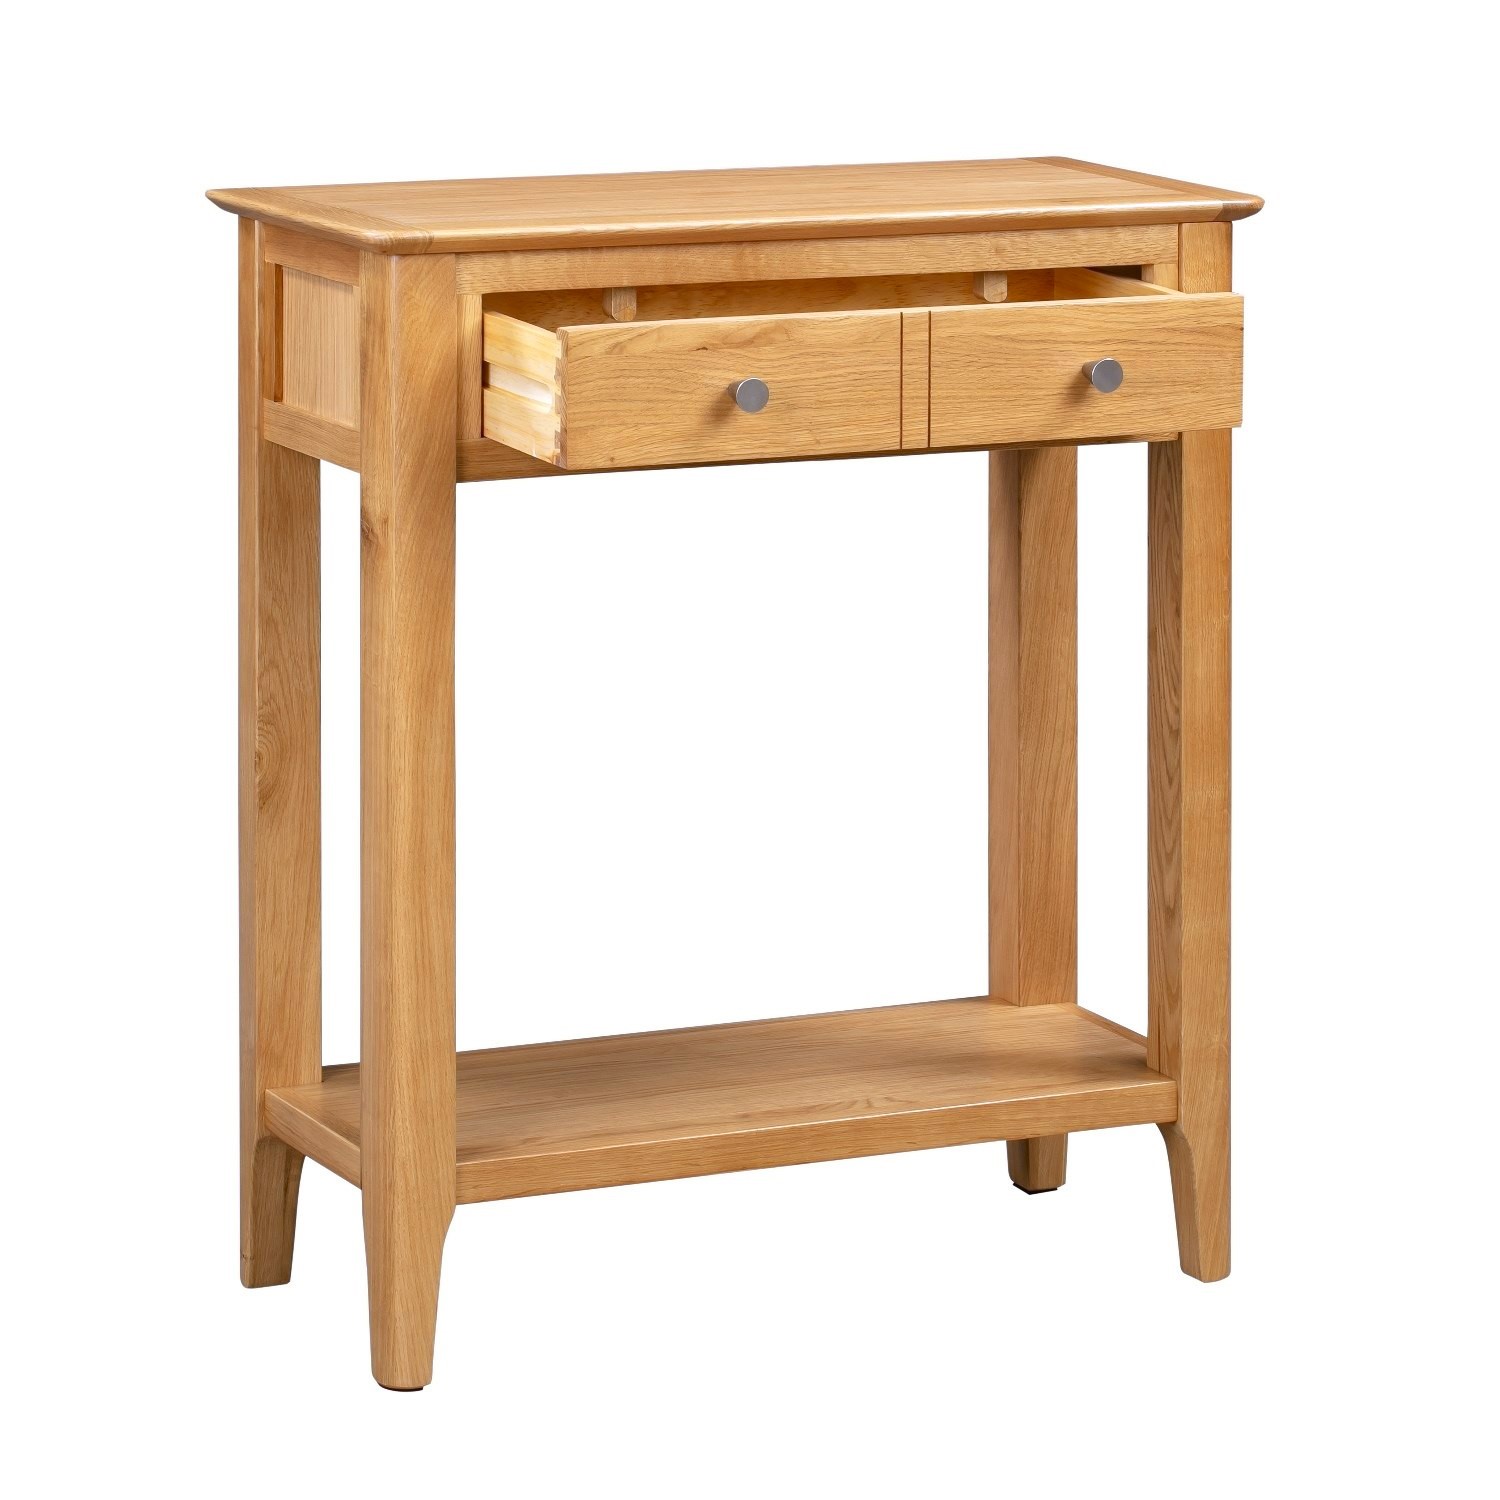 Narrow Solid Oak Console Table With Drawers Adeline Furniture123